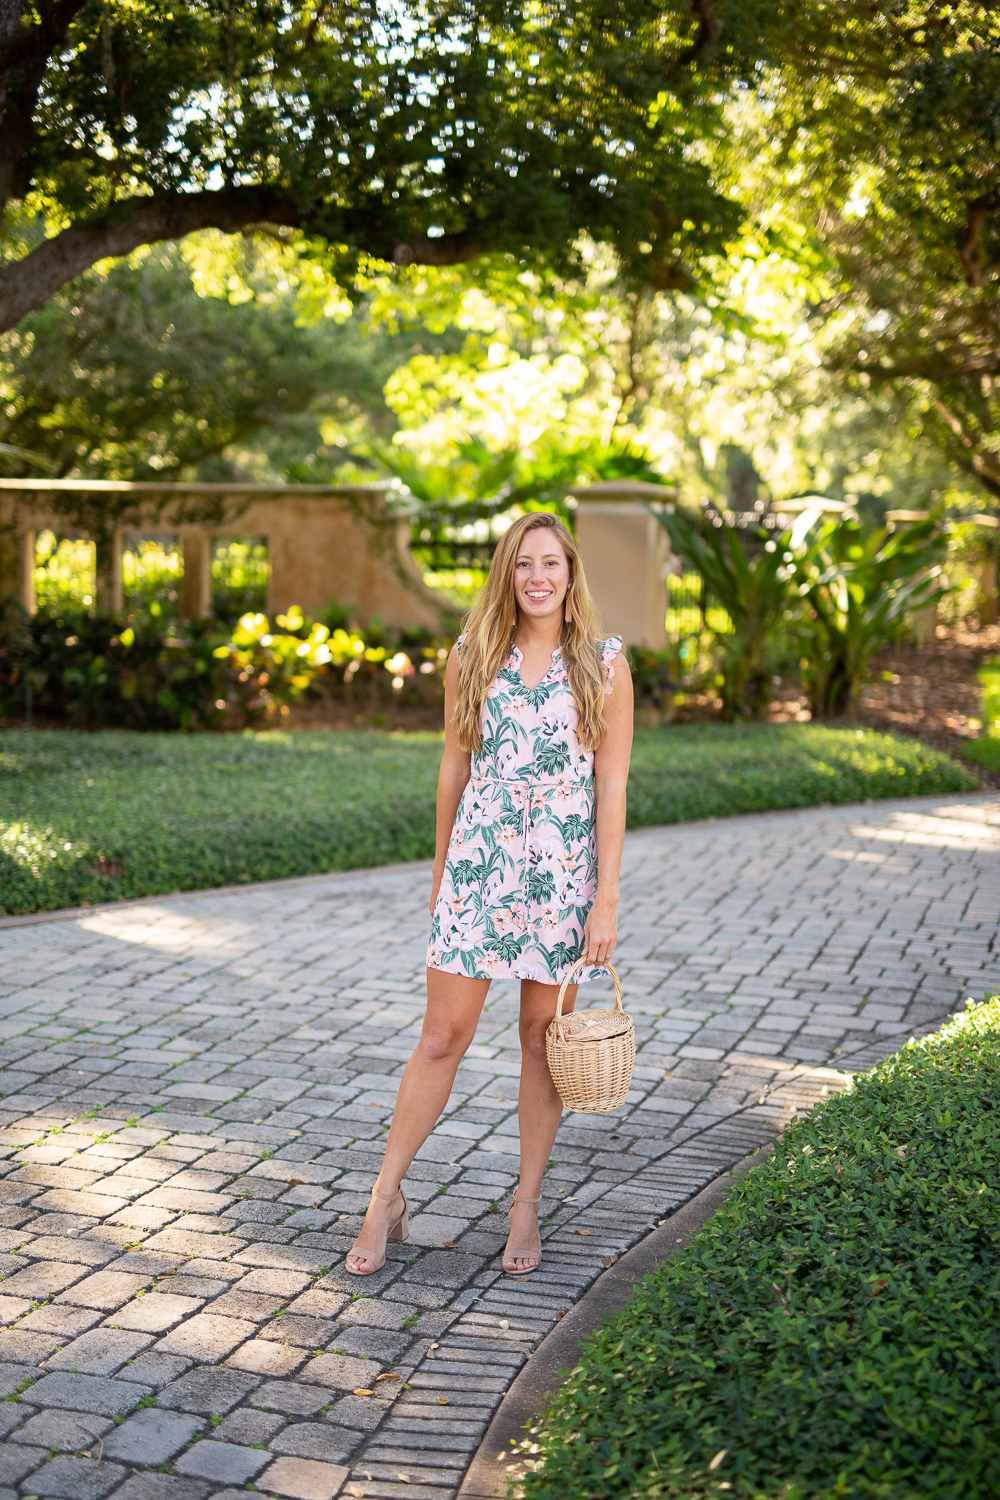 What to Wear to a Wedding: Floral, Maxi and Solid Colored Dresses | Sunshine Style